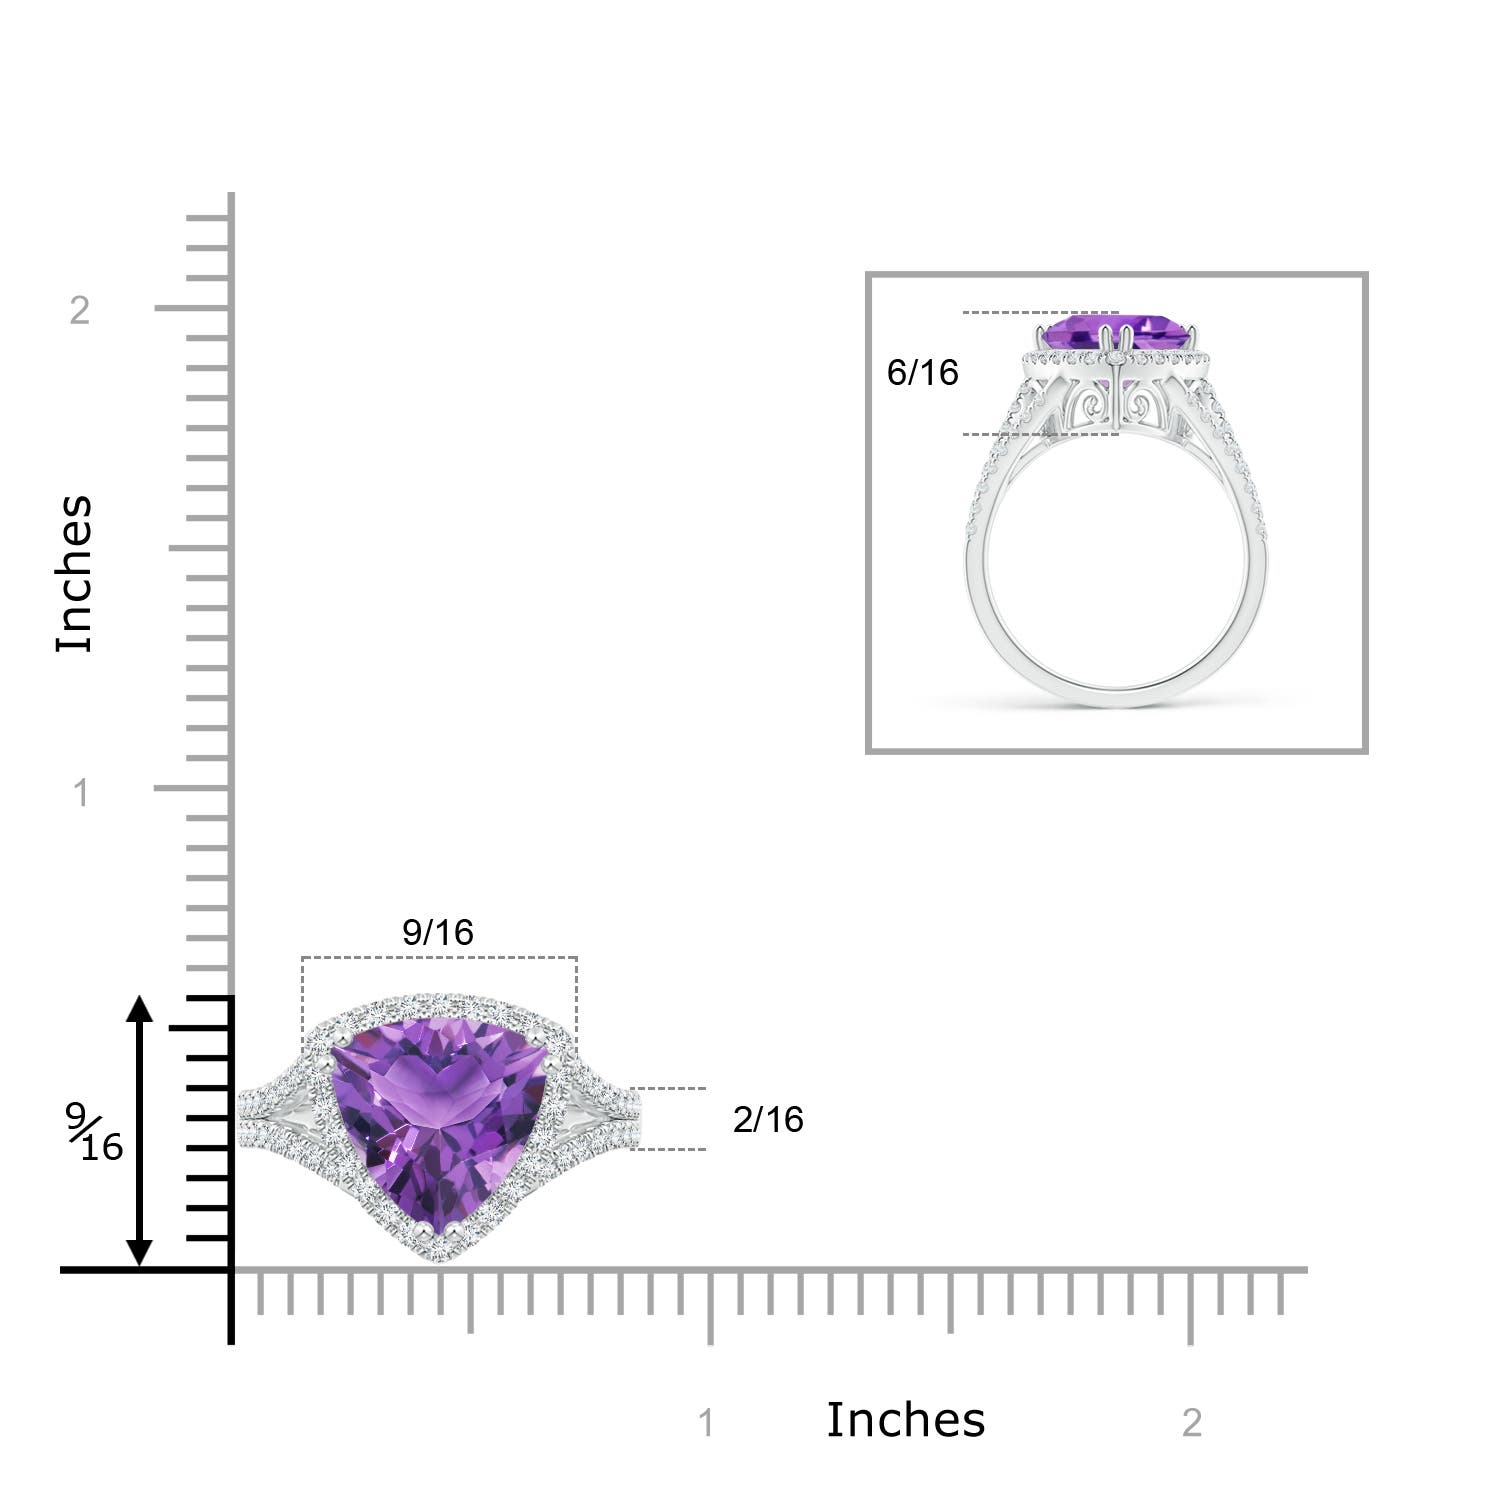 AA - Amethyst / 4.47 CT / 14 KT White Gold